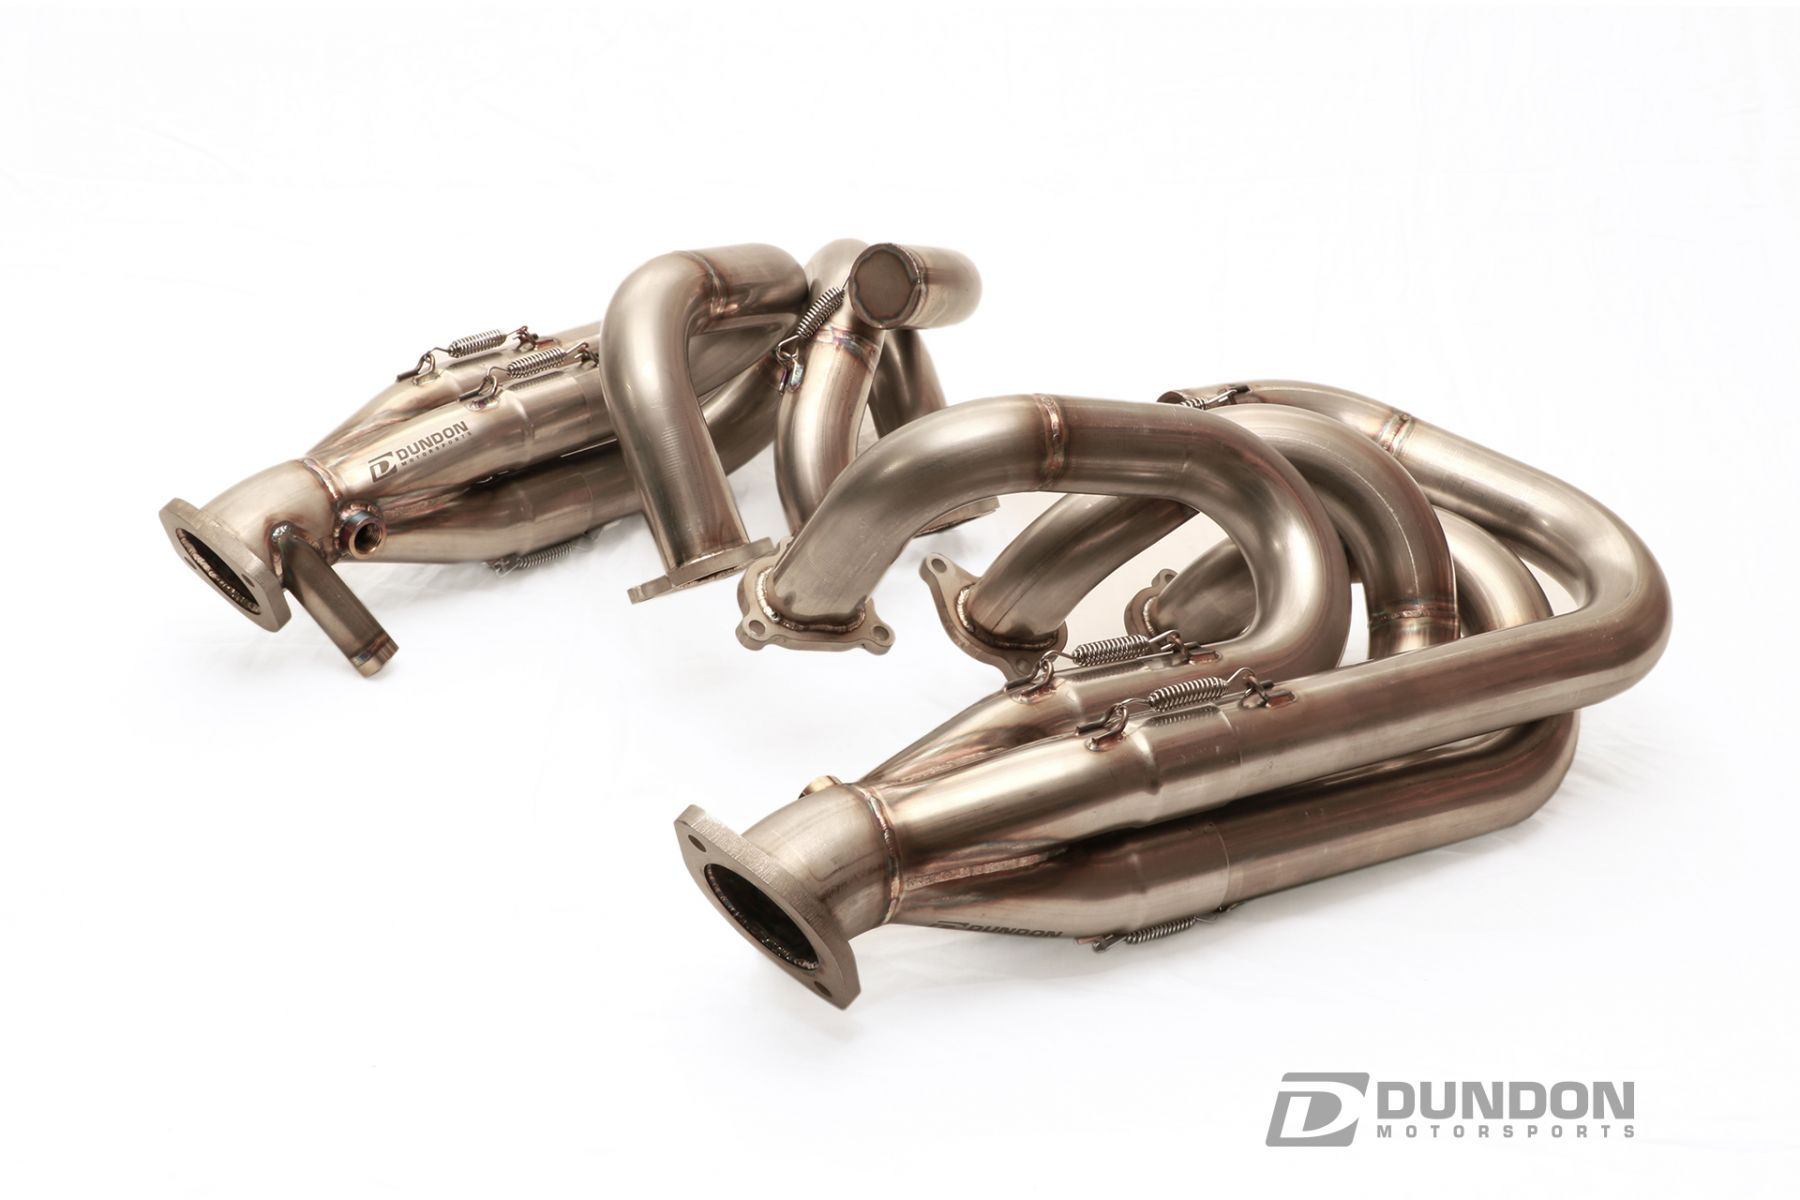 Engine - Exhaust - Dundon Motorsports 981 Cayman GT4/ Boxster Spyder Race Headers - Used - 2016 Porsche Cayman GT4 - 2016 Porsche Boxster - Chicago, IL 60601, United States